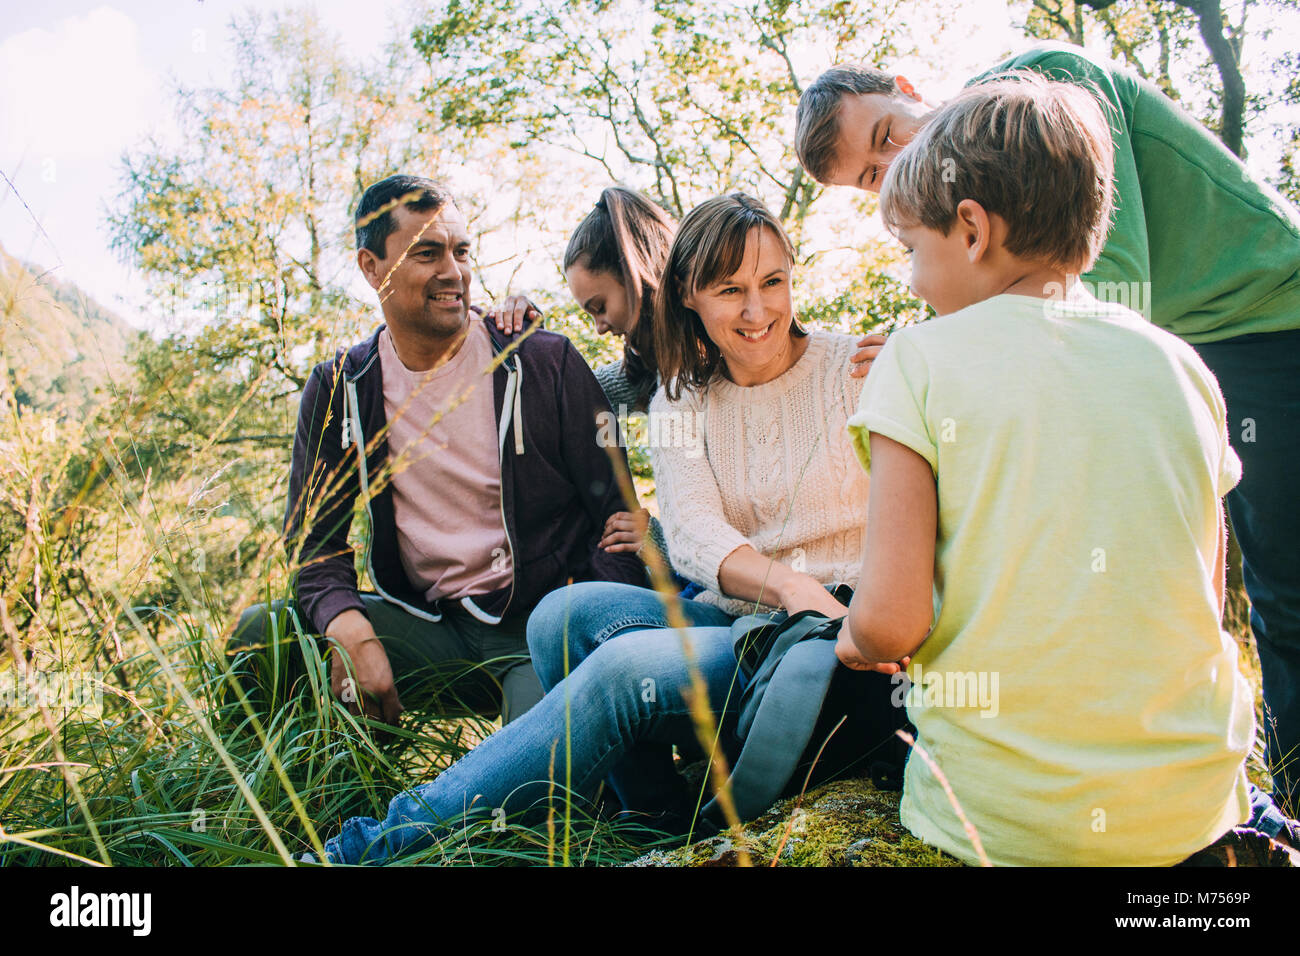 Happy family are taking a break from their hike to eat their packed lunches. Stock Photo